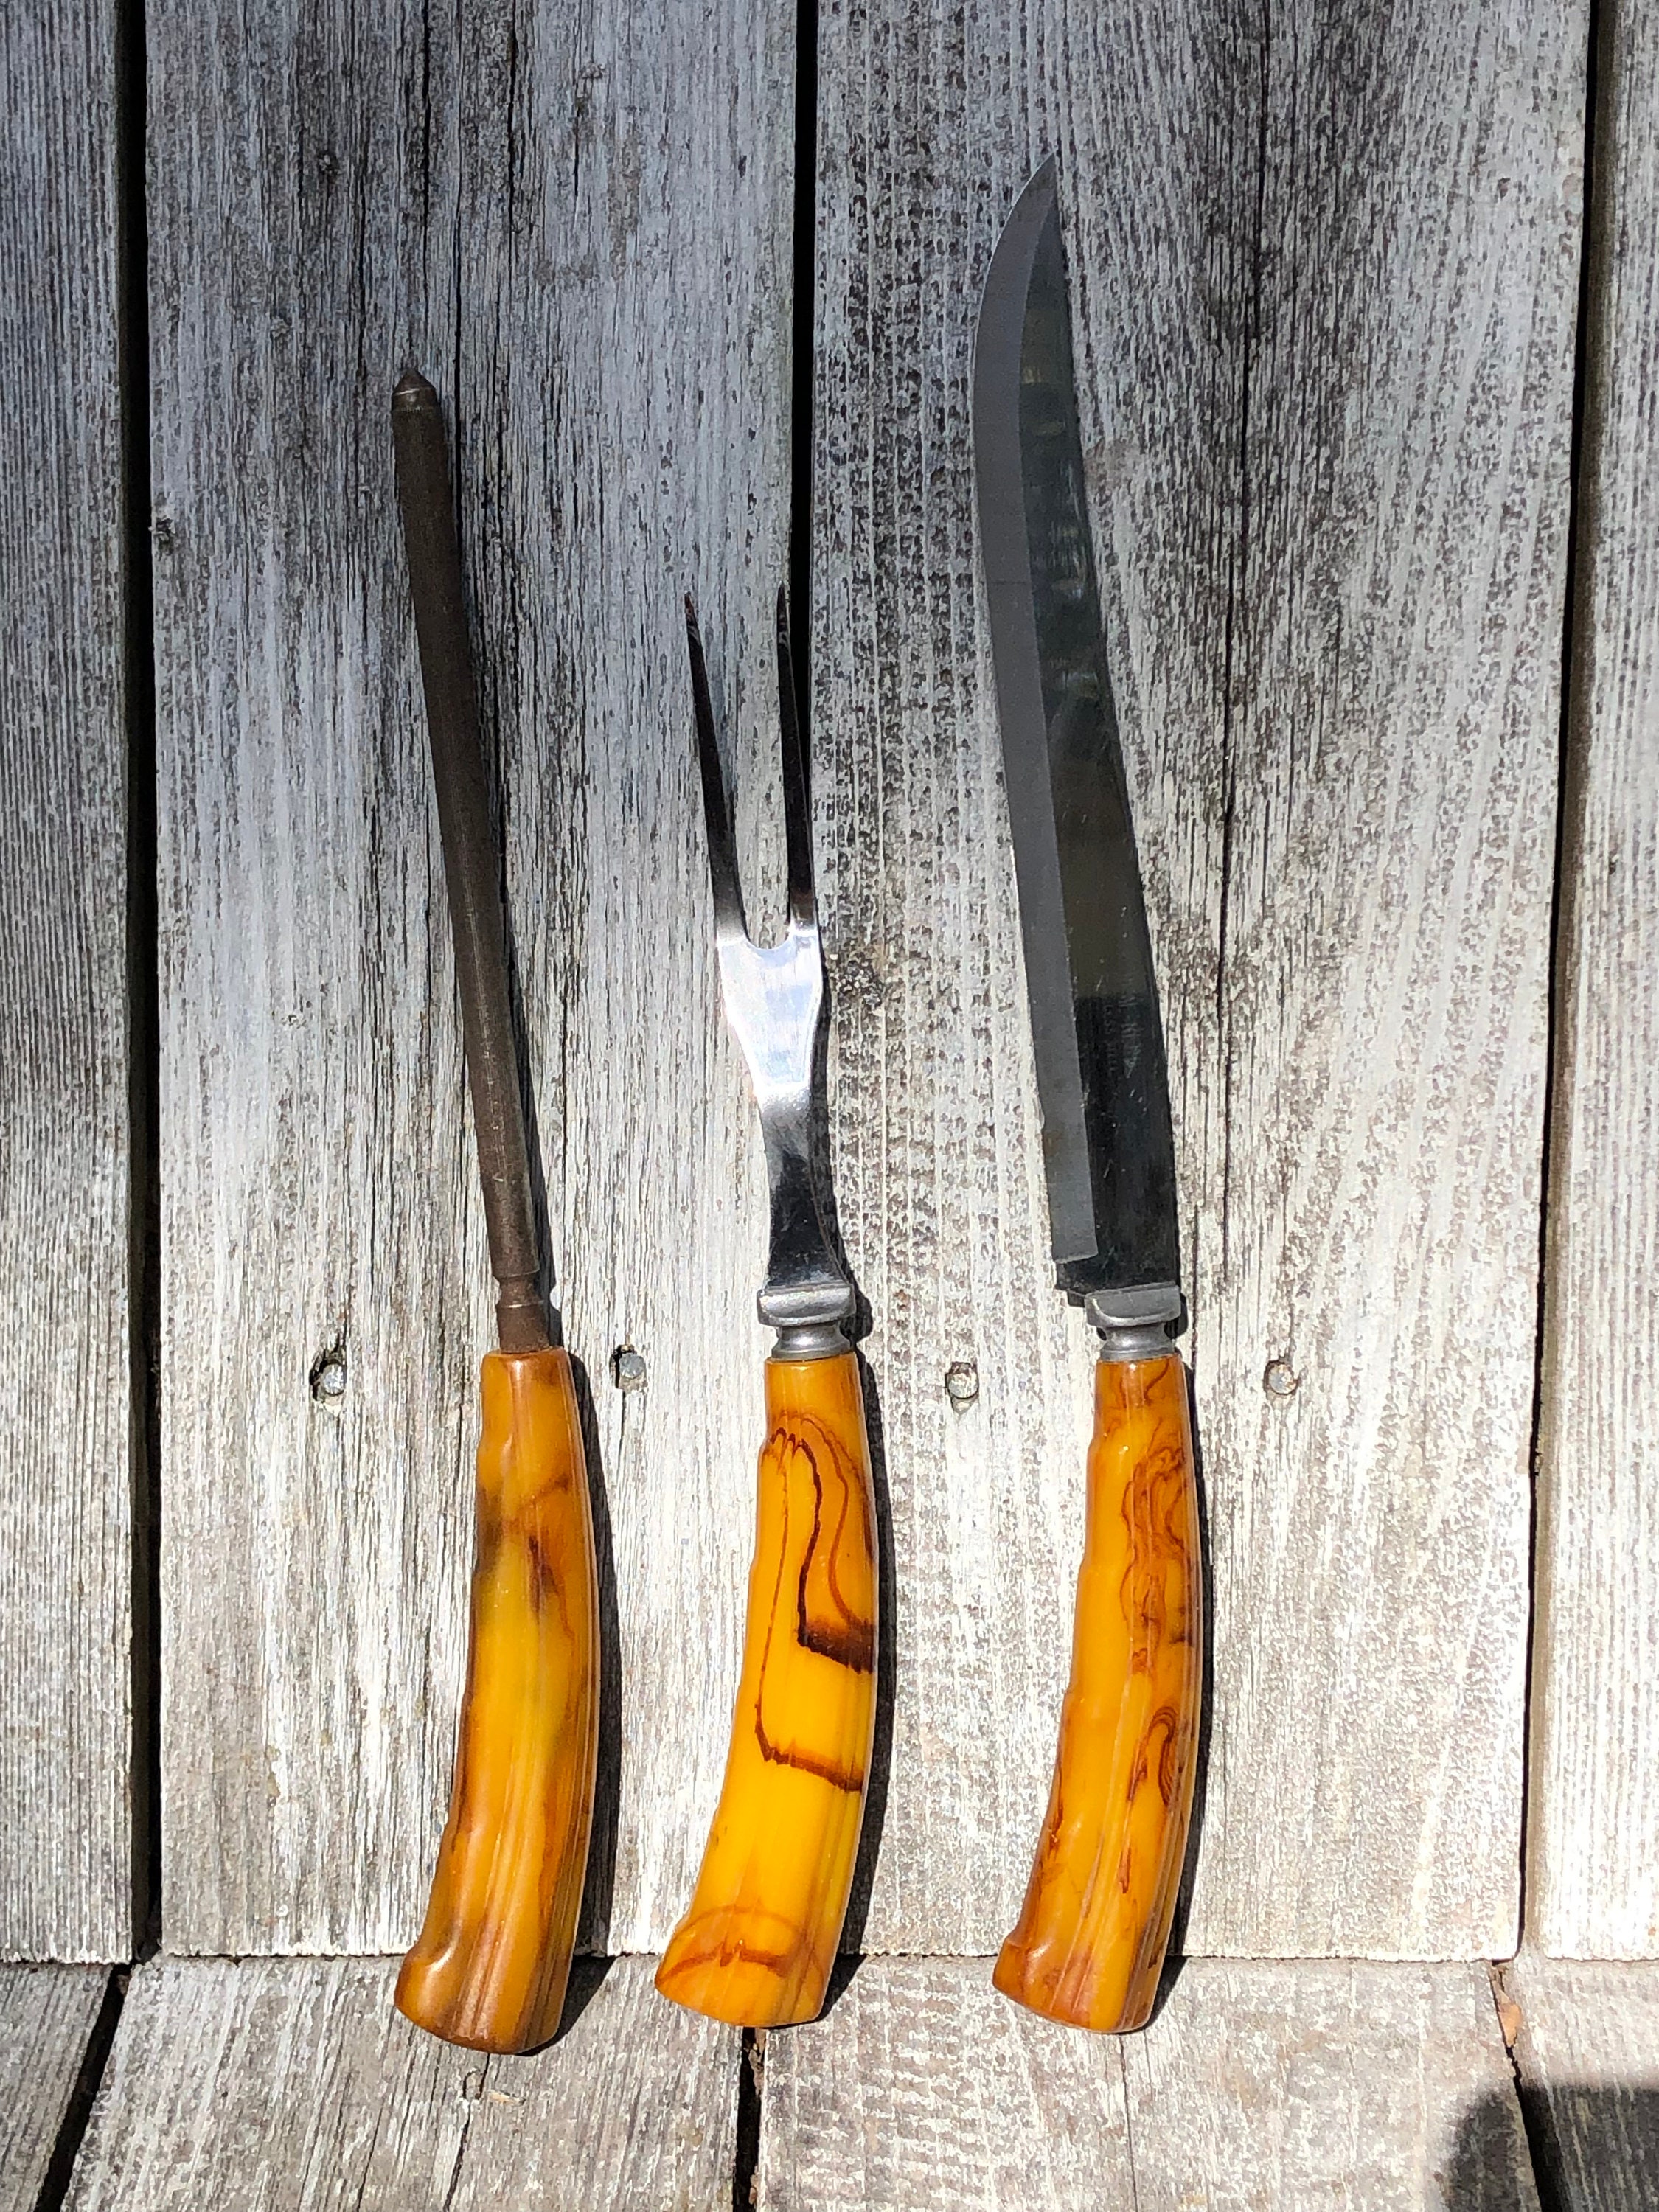 Vintage Fuller Brothers Carving Knife Set Bakelite Handle Yellow Marble  Style Three Piece Carving Set Vintage Kitchen Decor 